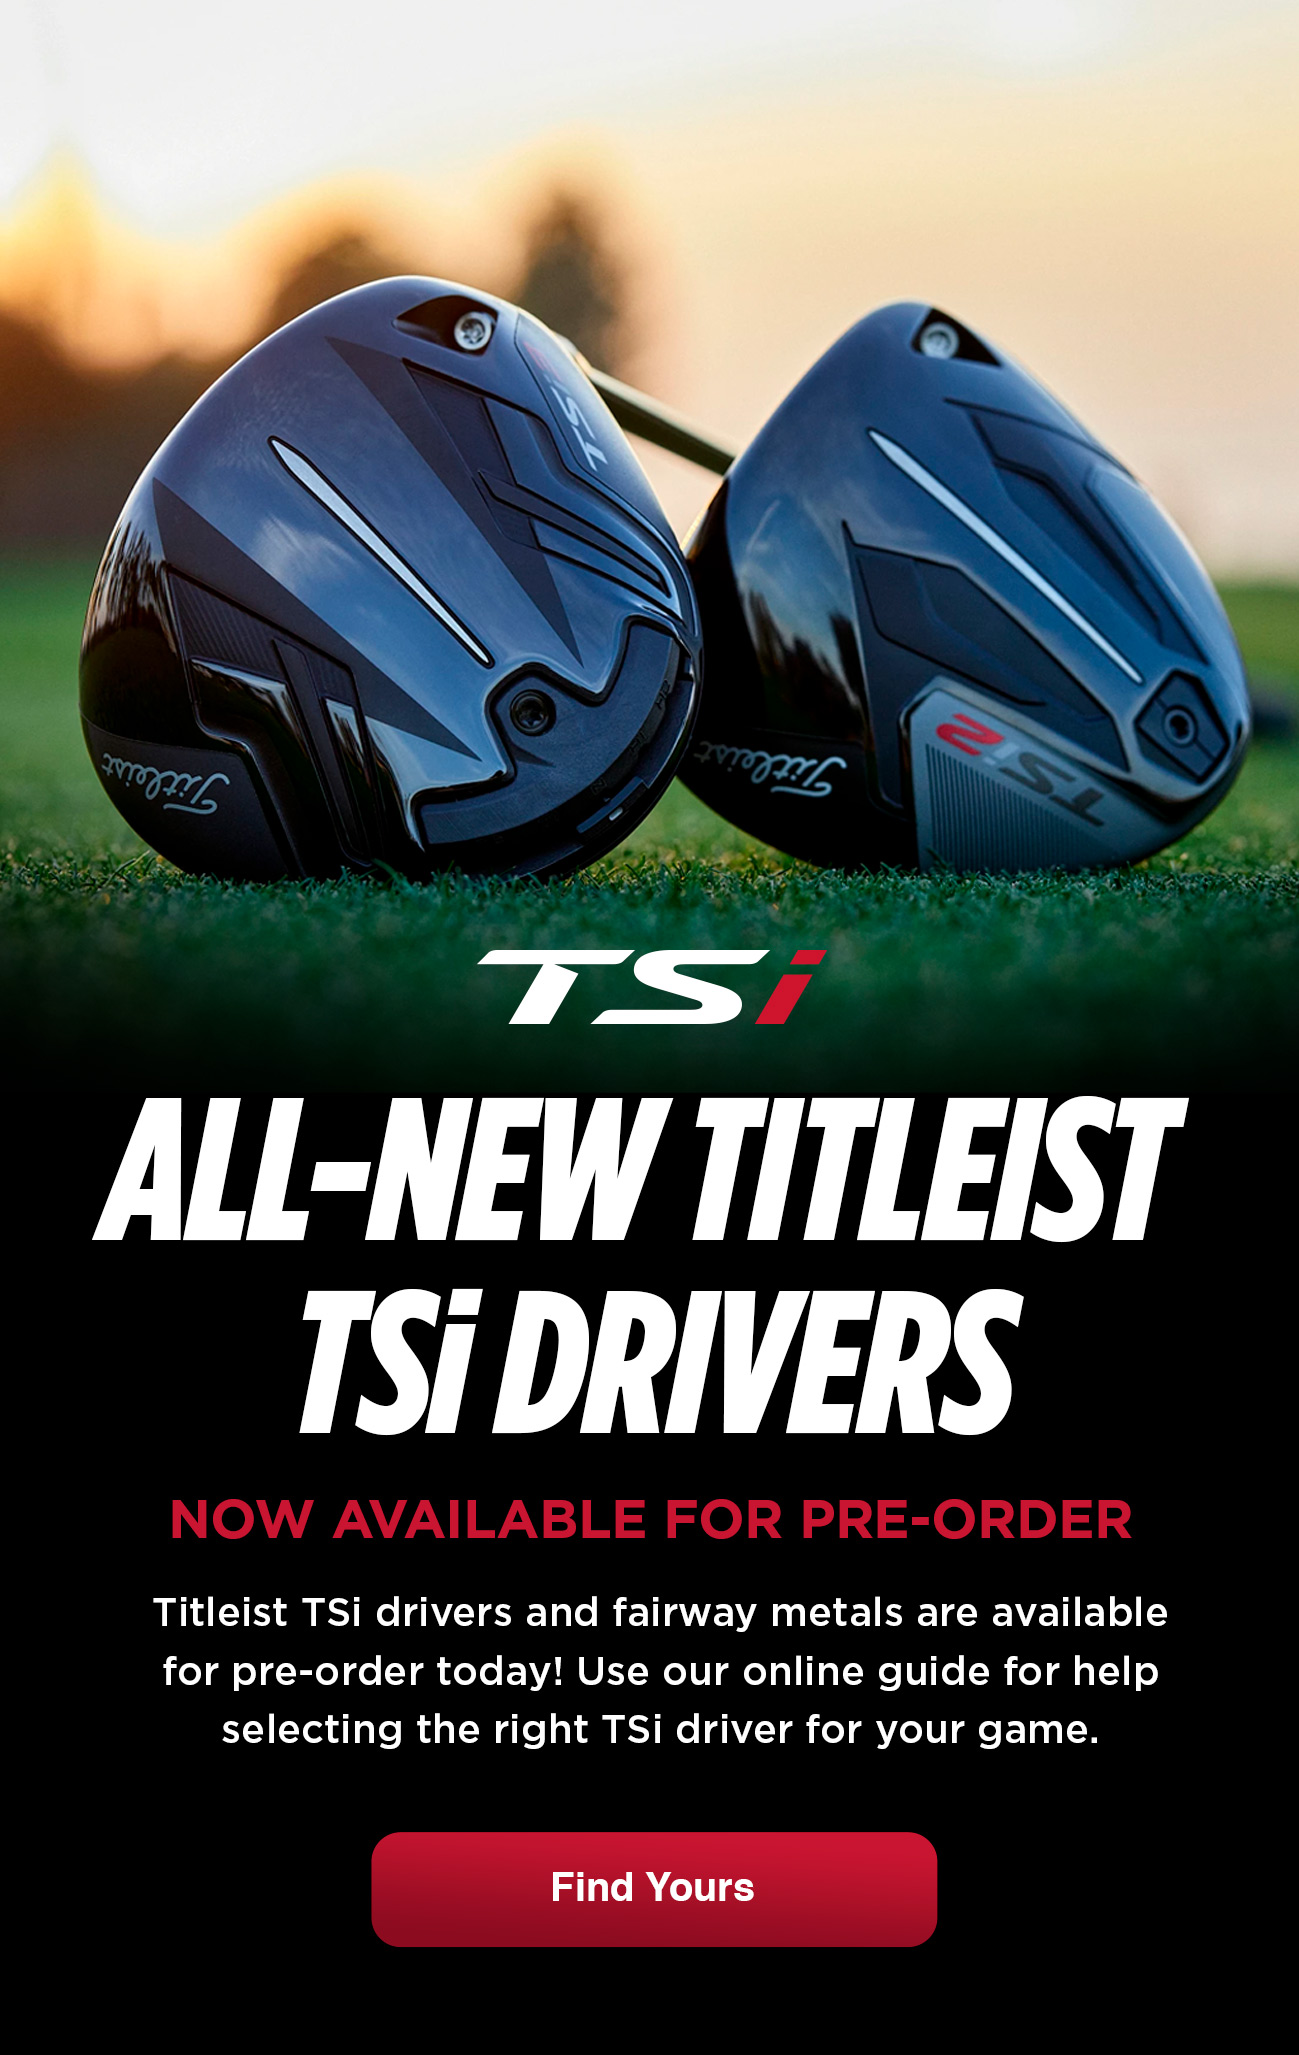 All-New TSi Drivers - Now Available for Pre-Order